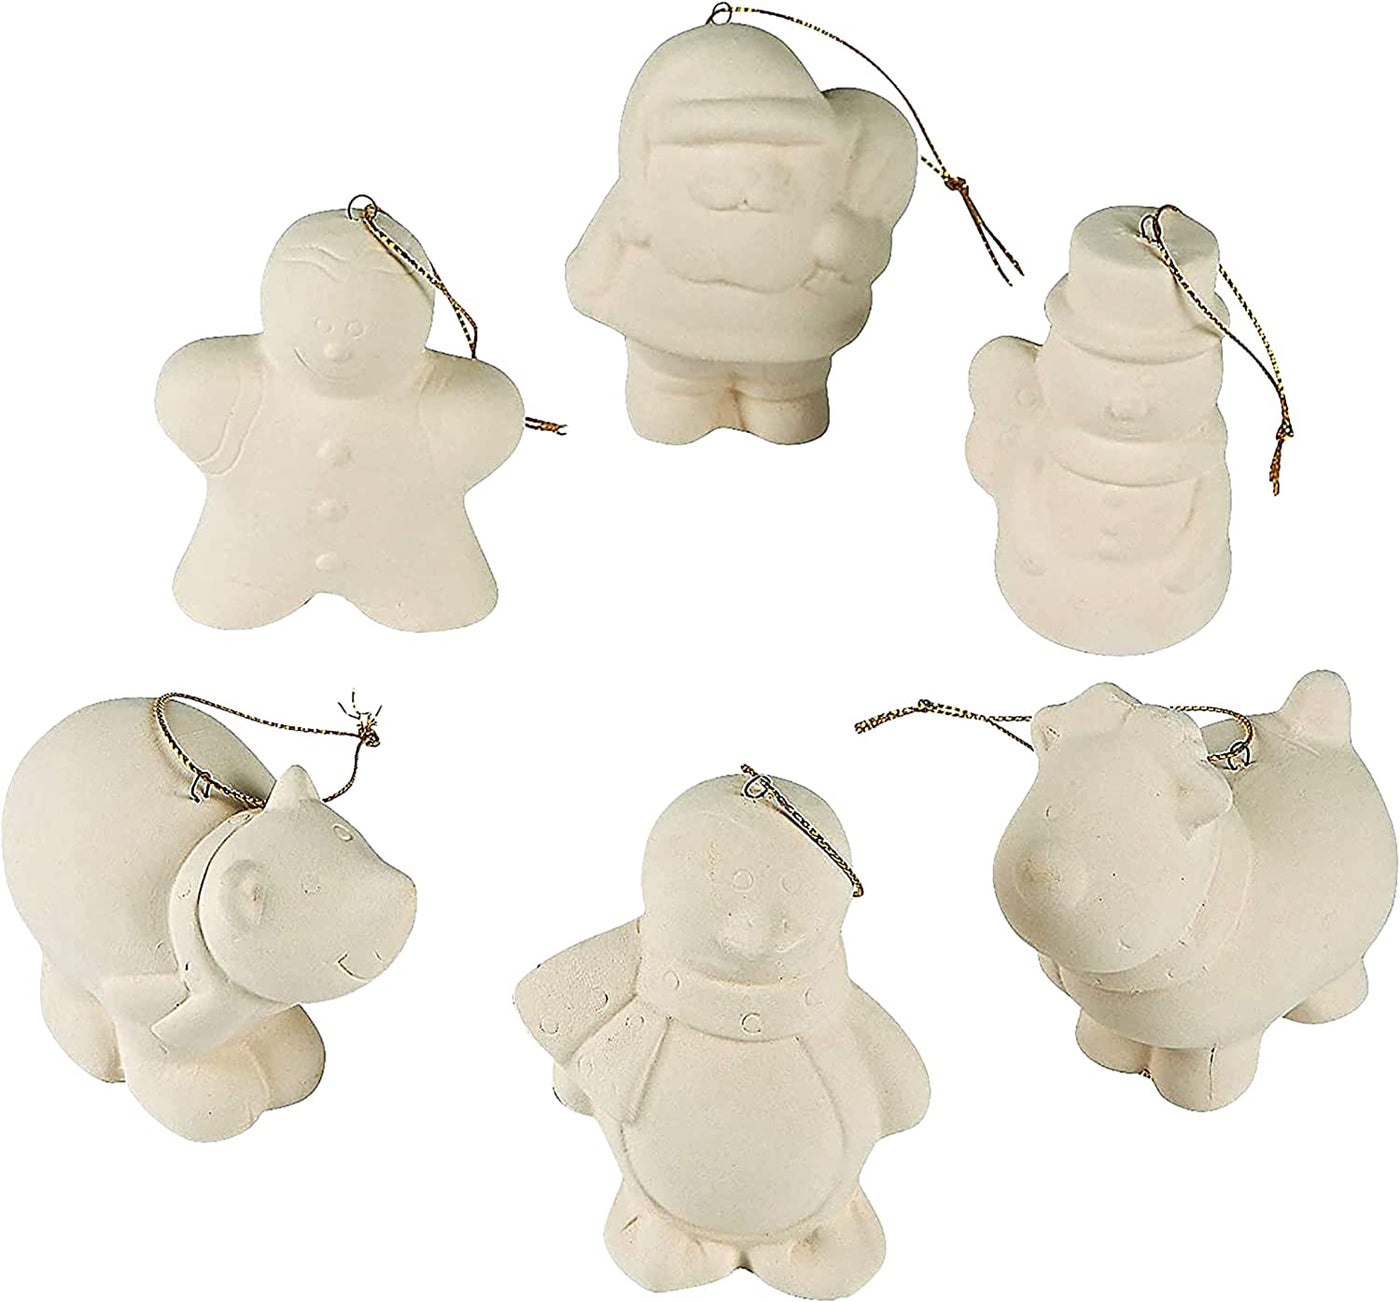 Ready to Paint Ceramic Christmas Ornaments (12 Pack) Crafts for Adults & Kids, DIY Design Your Own Ornaments to Paint by 4E's Novelty